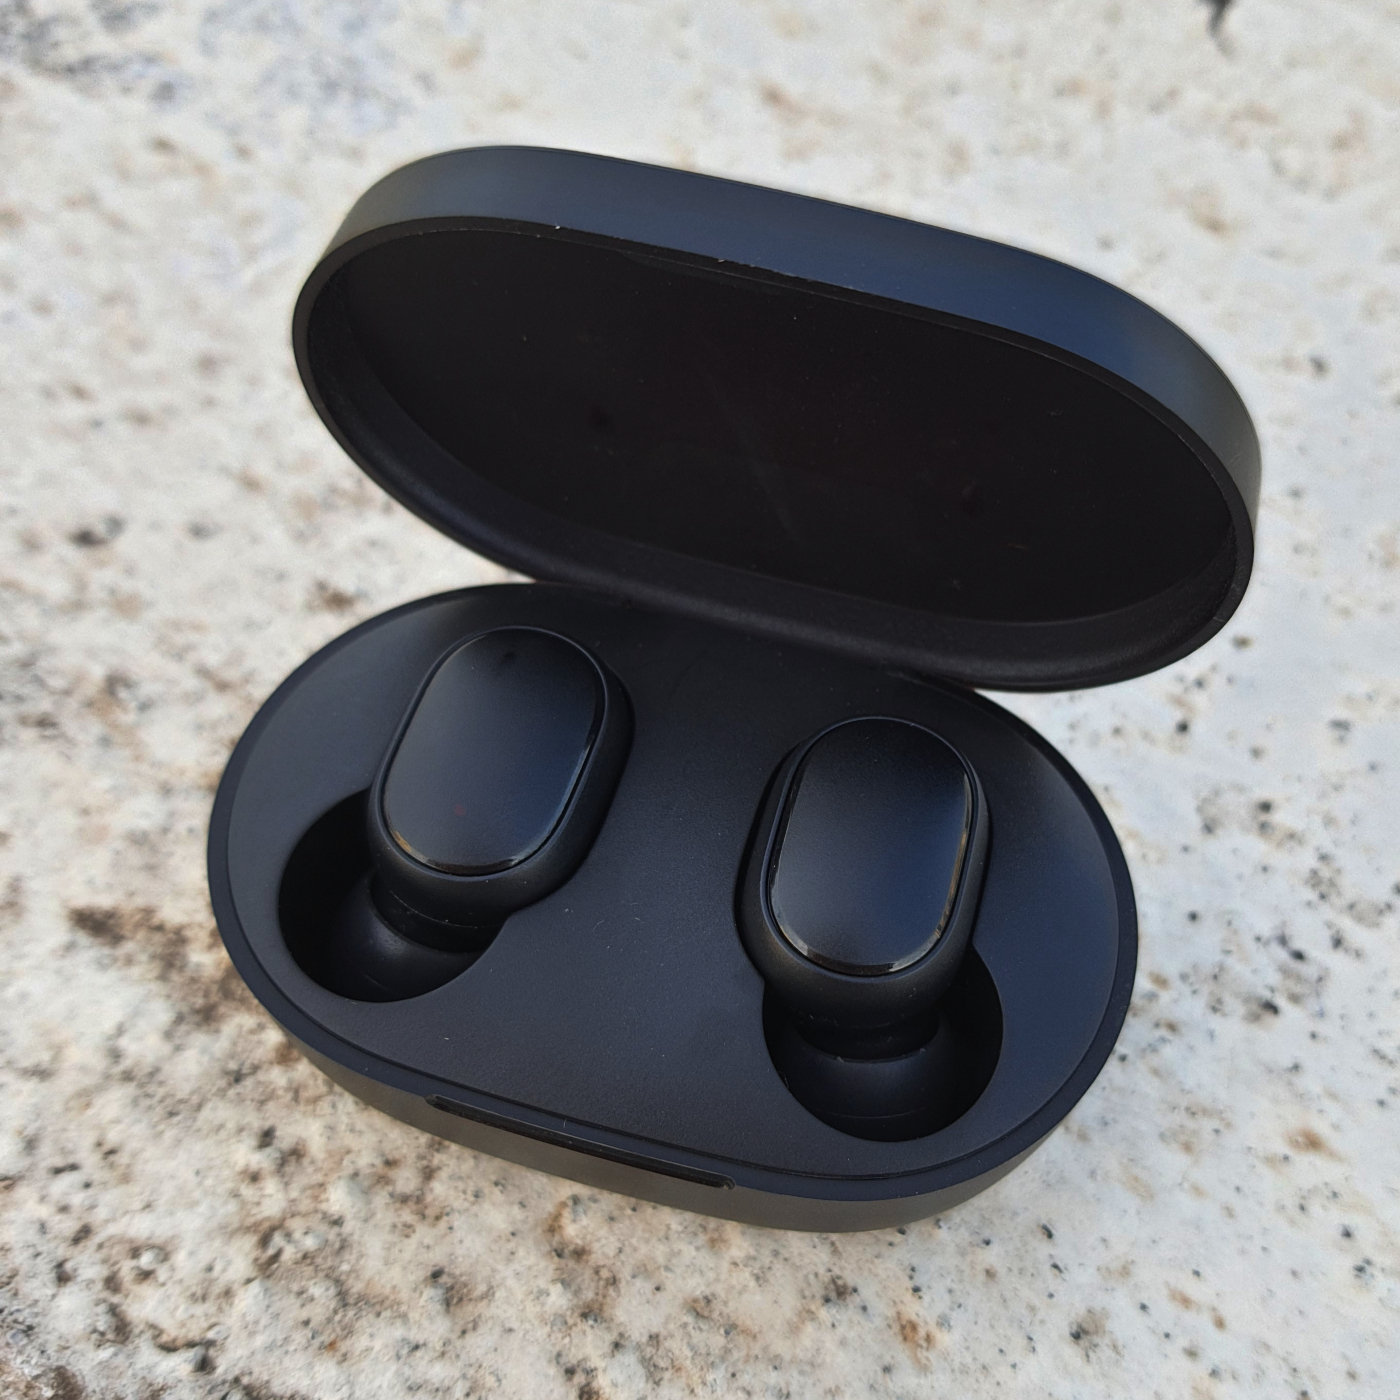 Xiaomi Redmi Earbuds S review: Perfect for the price